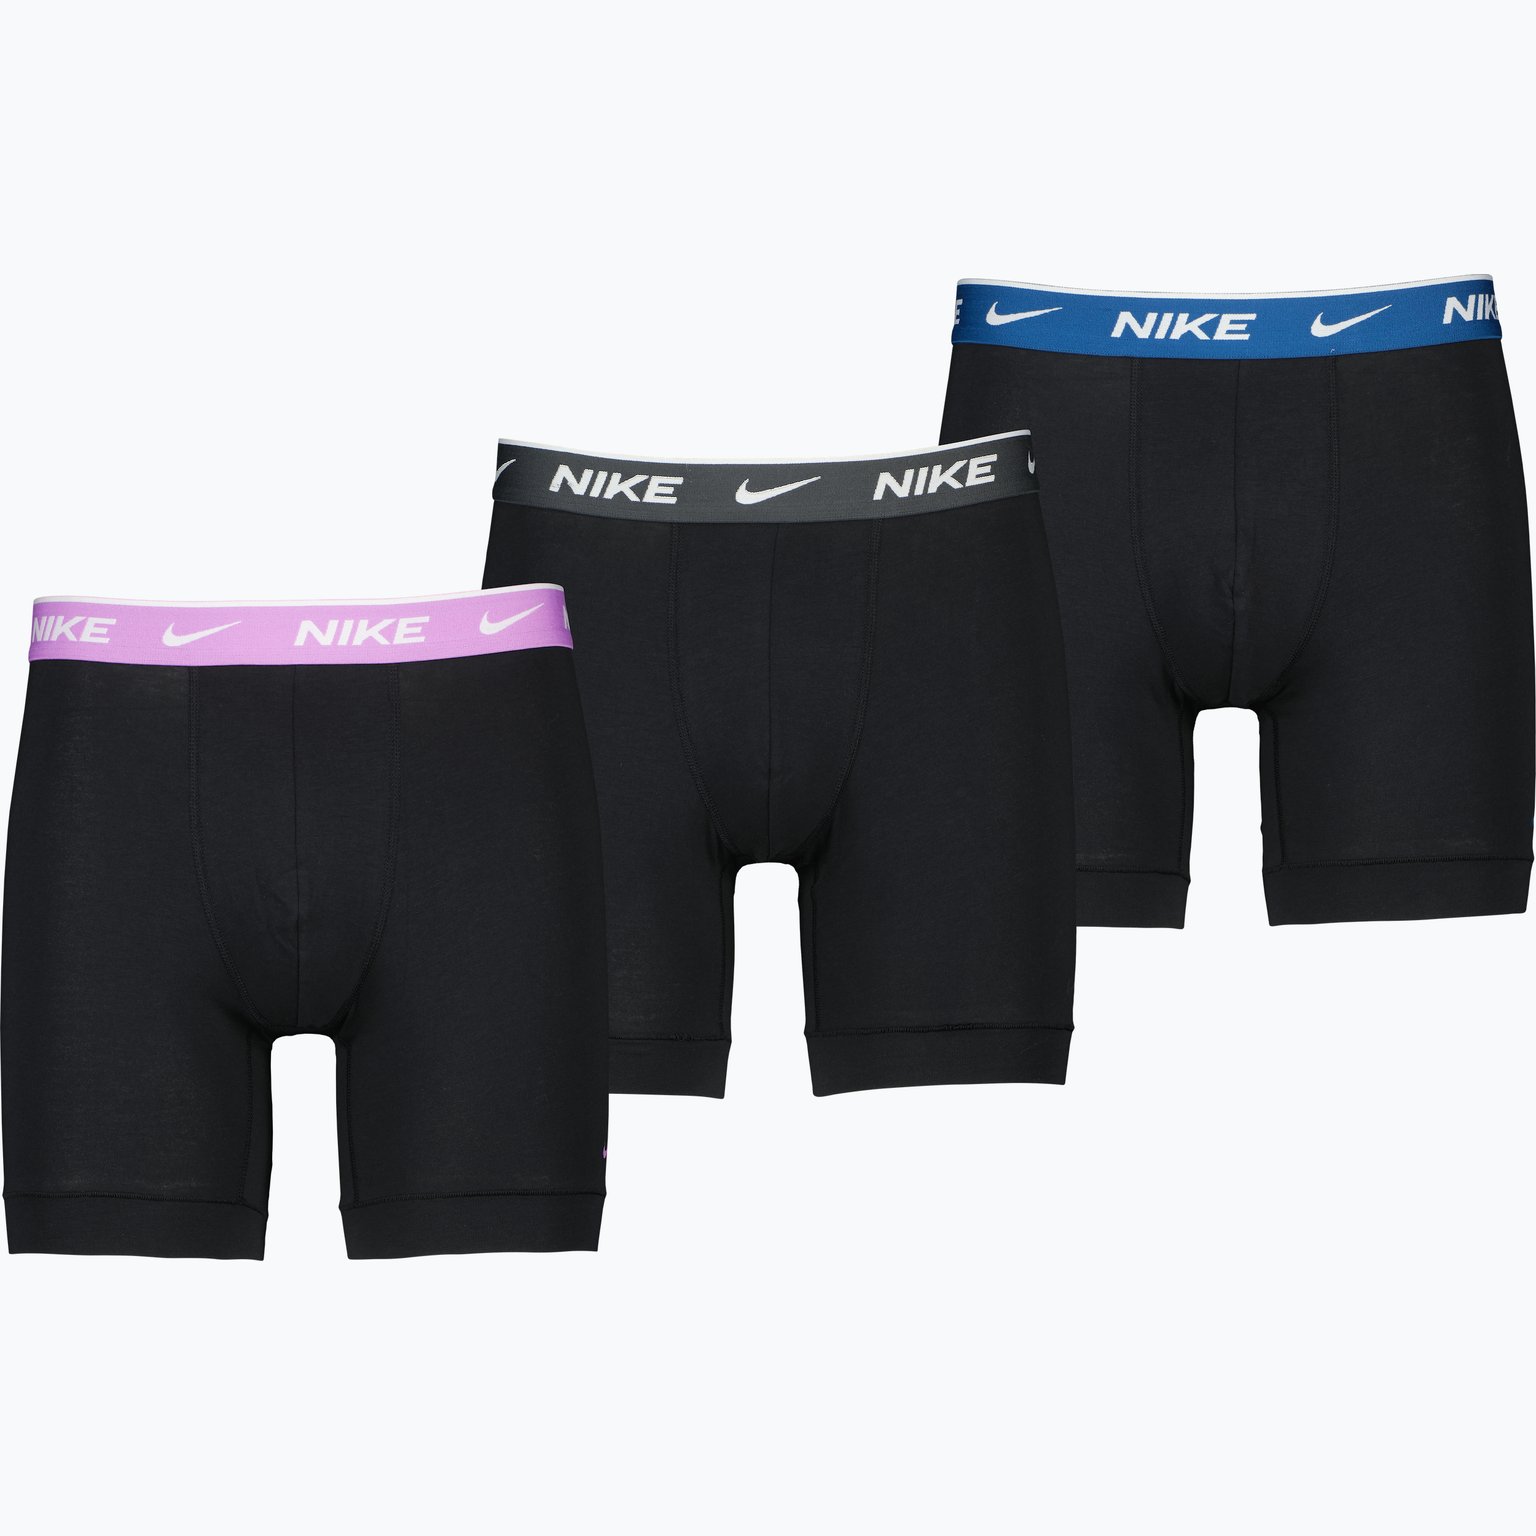 Boxer Brief 3-pack kalsonger